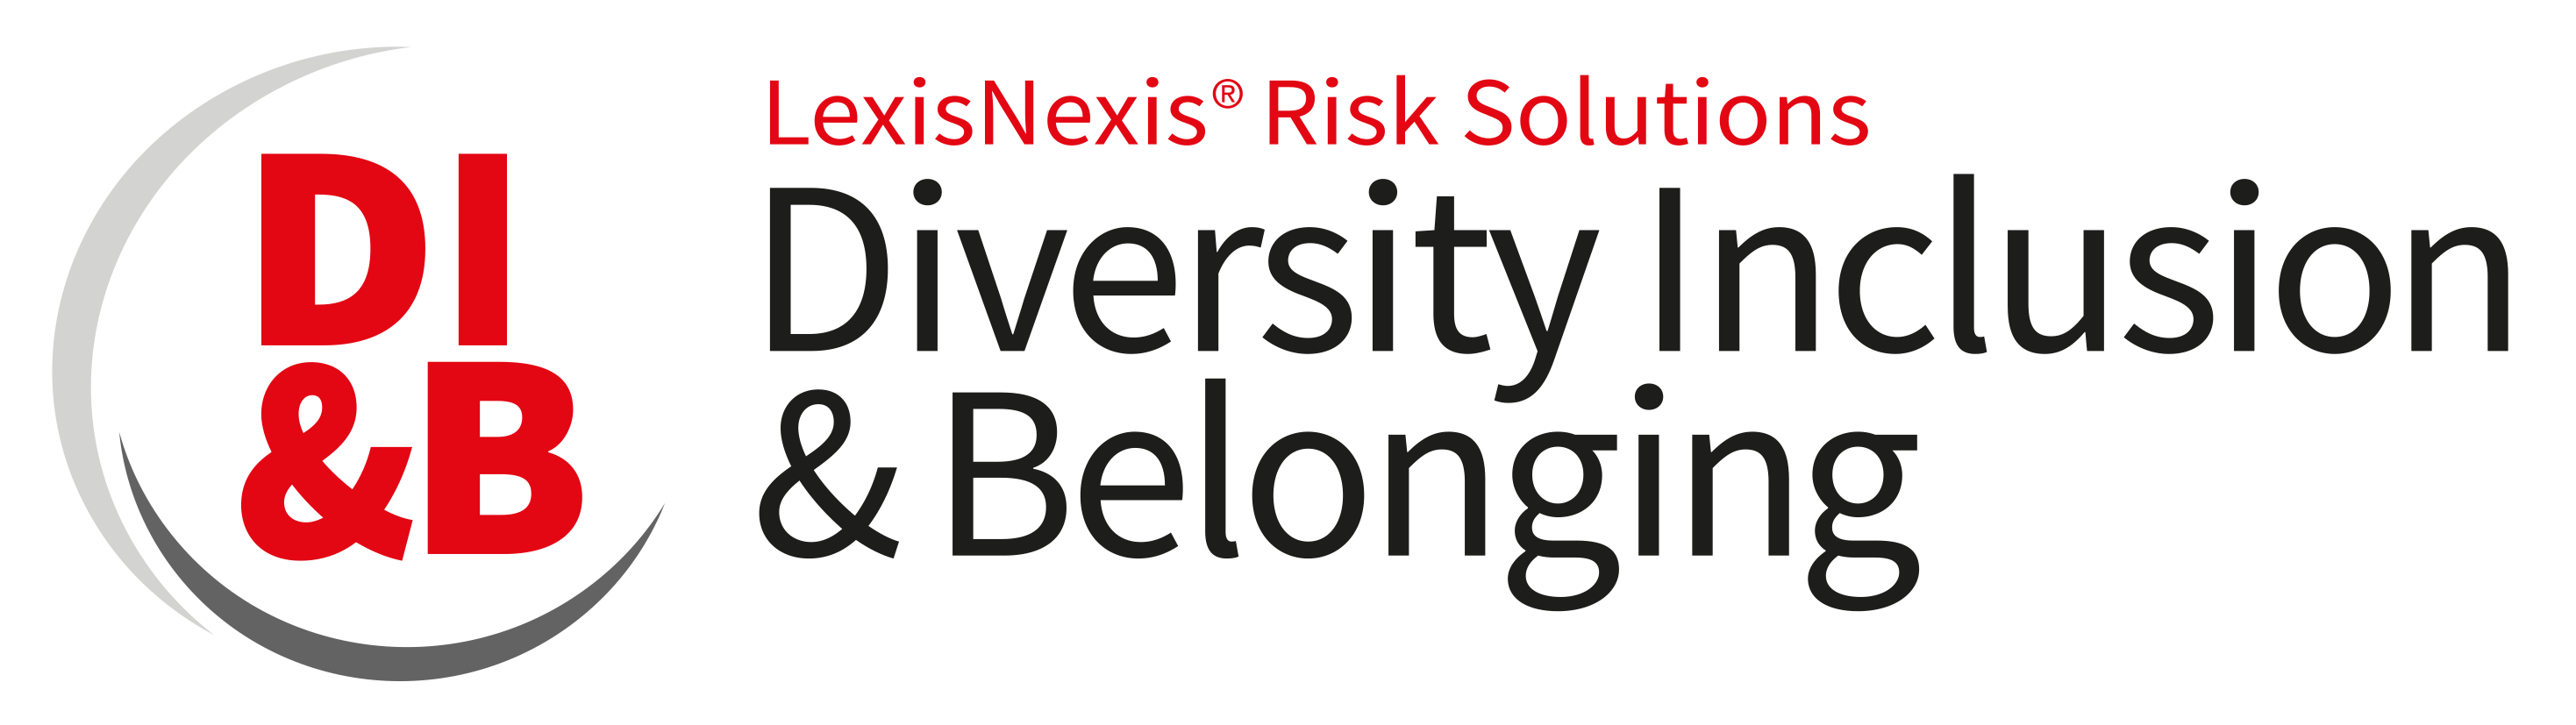 the diversity inclusion and belonging logo